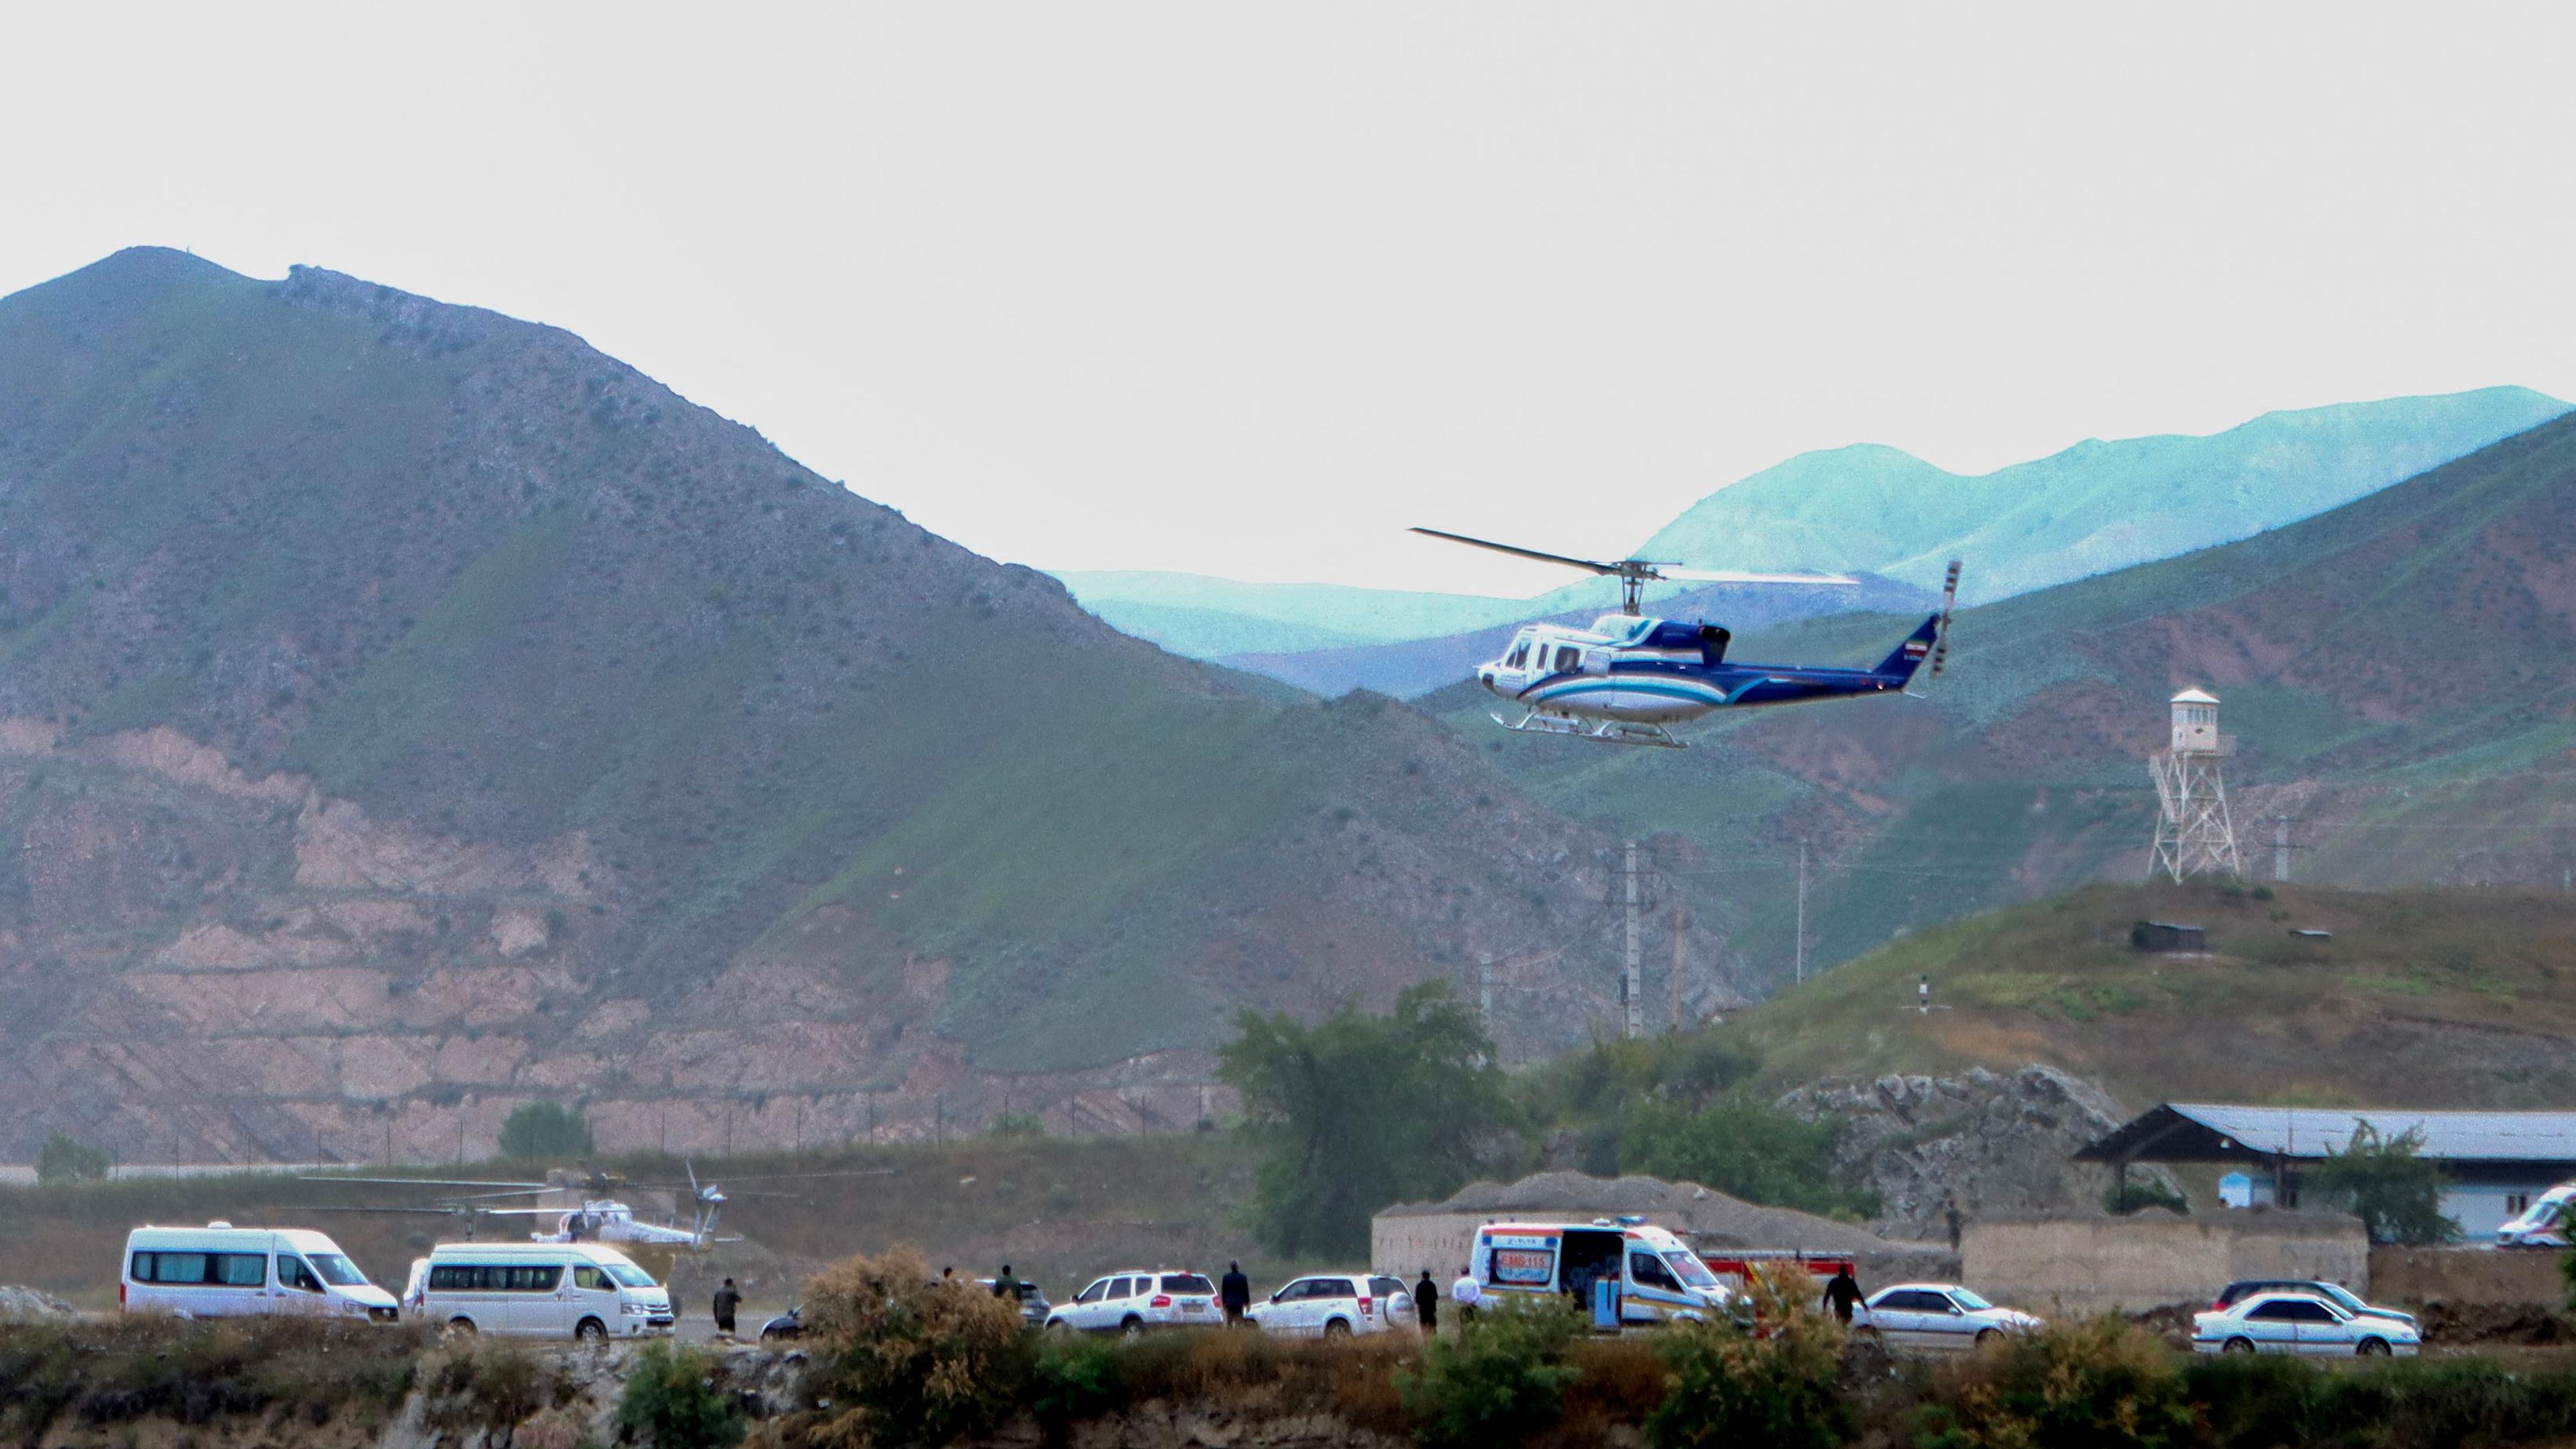 In this photo provided by Islamic Republic News Agency IRNA on May 19, 2024, shows the helicopter carrying Iran's President Ebrahim Raisi taking off at the Iranian border with Azerbaijan after the inauguration of the dam of Qiz Qalasi, in Aras. A helicopter in the convoy of the Iranian president was involved in "an accident" in East Azerbaijan province on May 19, state televsion reported, without specifying if the president was on board. (Photo by Ali Hamed HAGHDOUST / IRNA / AFP)